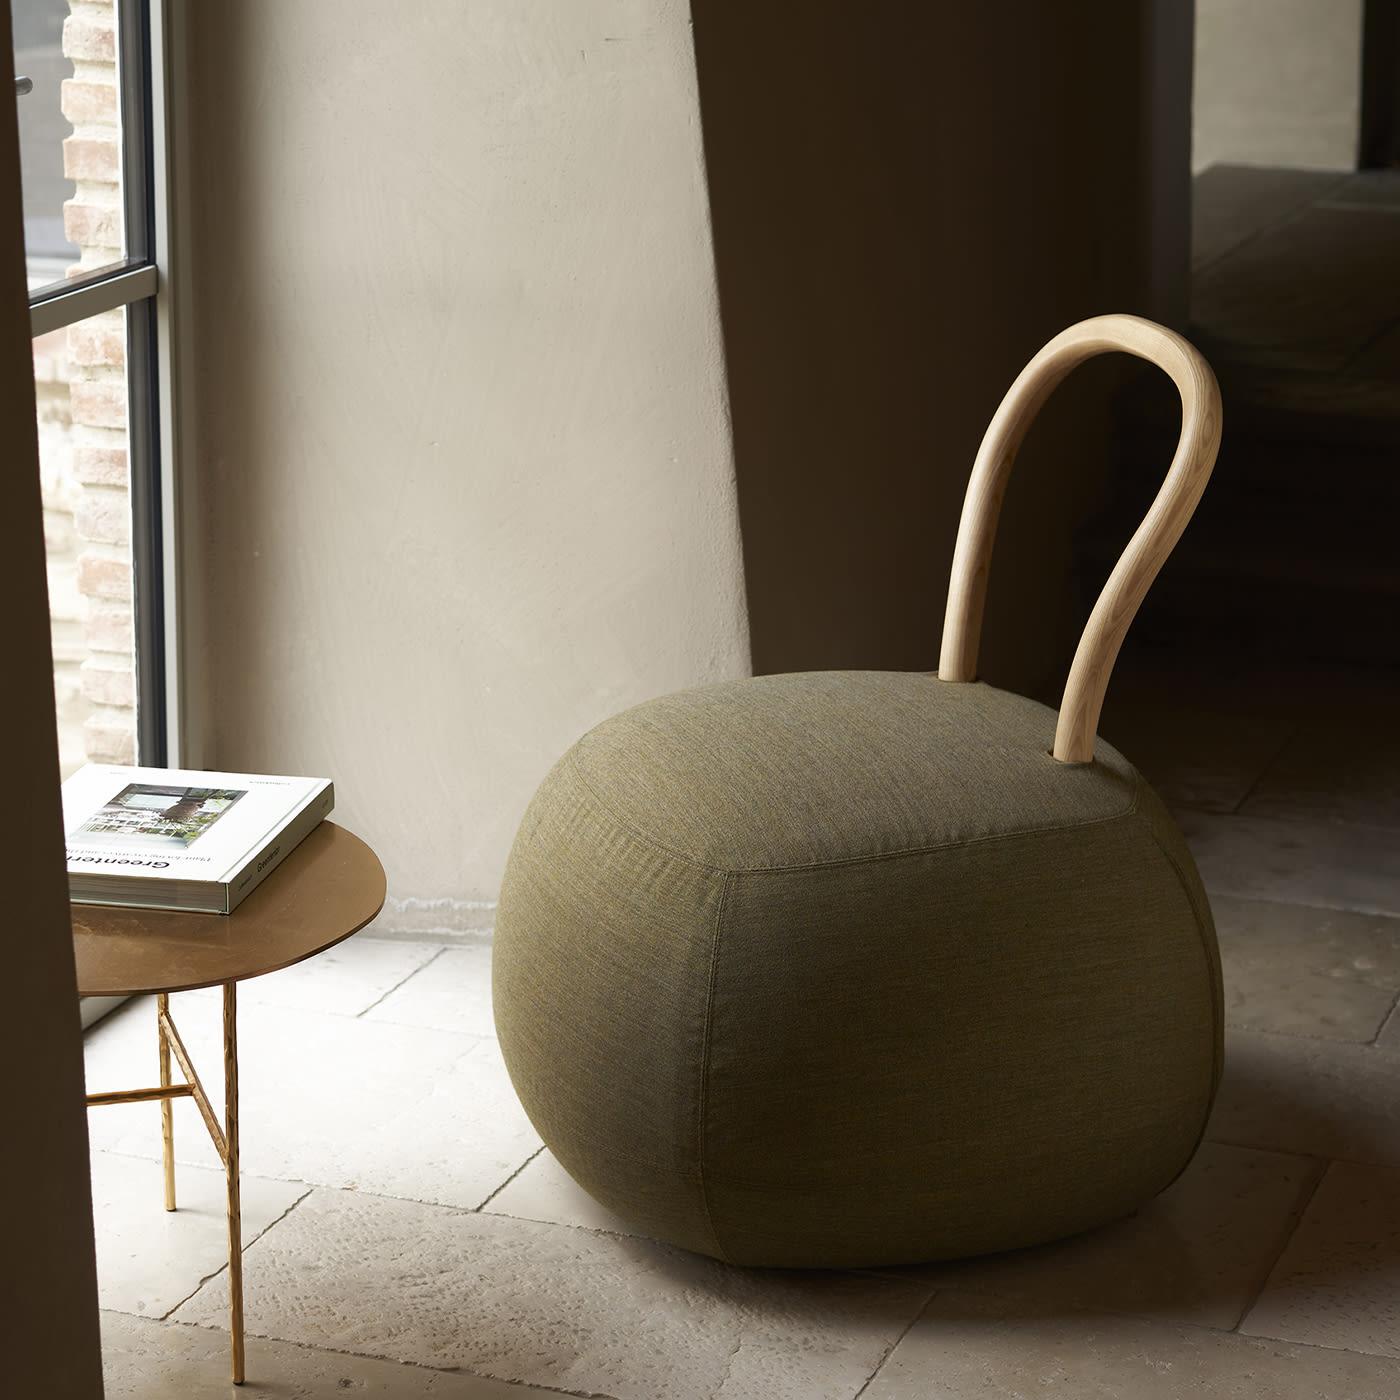 The encounter between a pouf and a chair led to this lively design, comprised of a generously stuffed rounded seat to which is fitted an essential and sinuous backrest in curved, whitened solid ash. Perfect to pamper a minimalist decor with a quiet